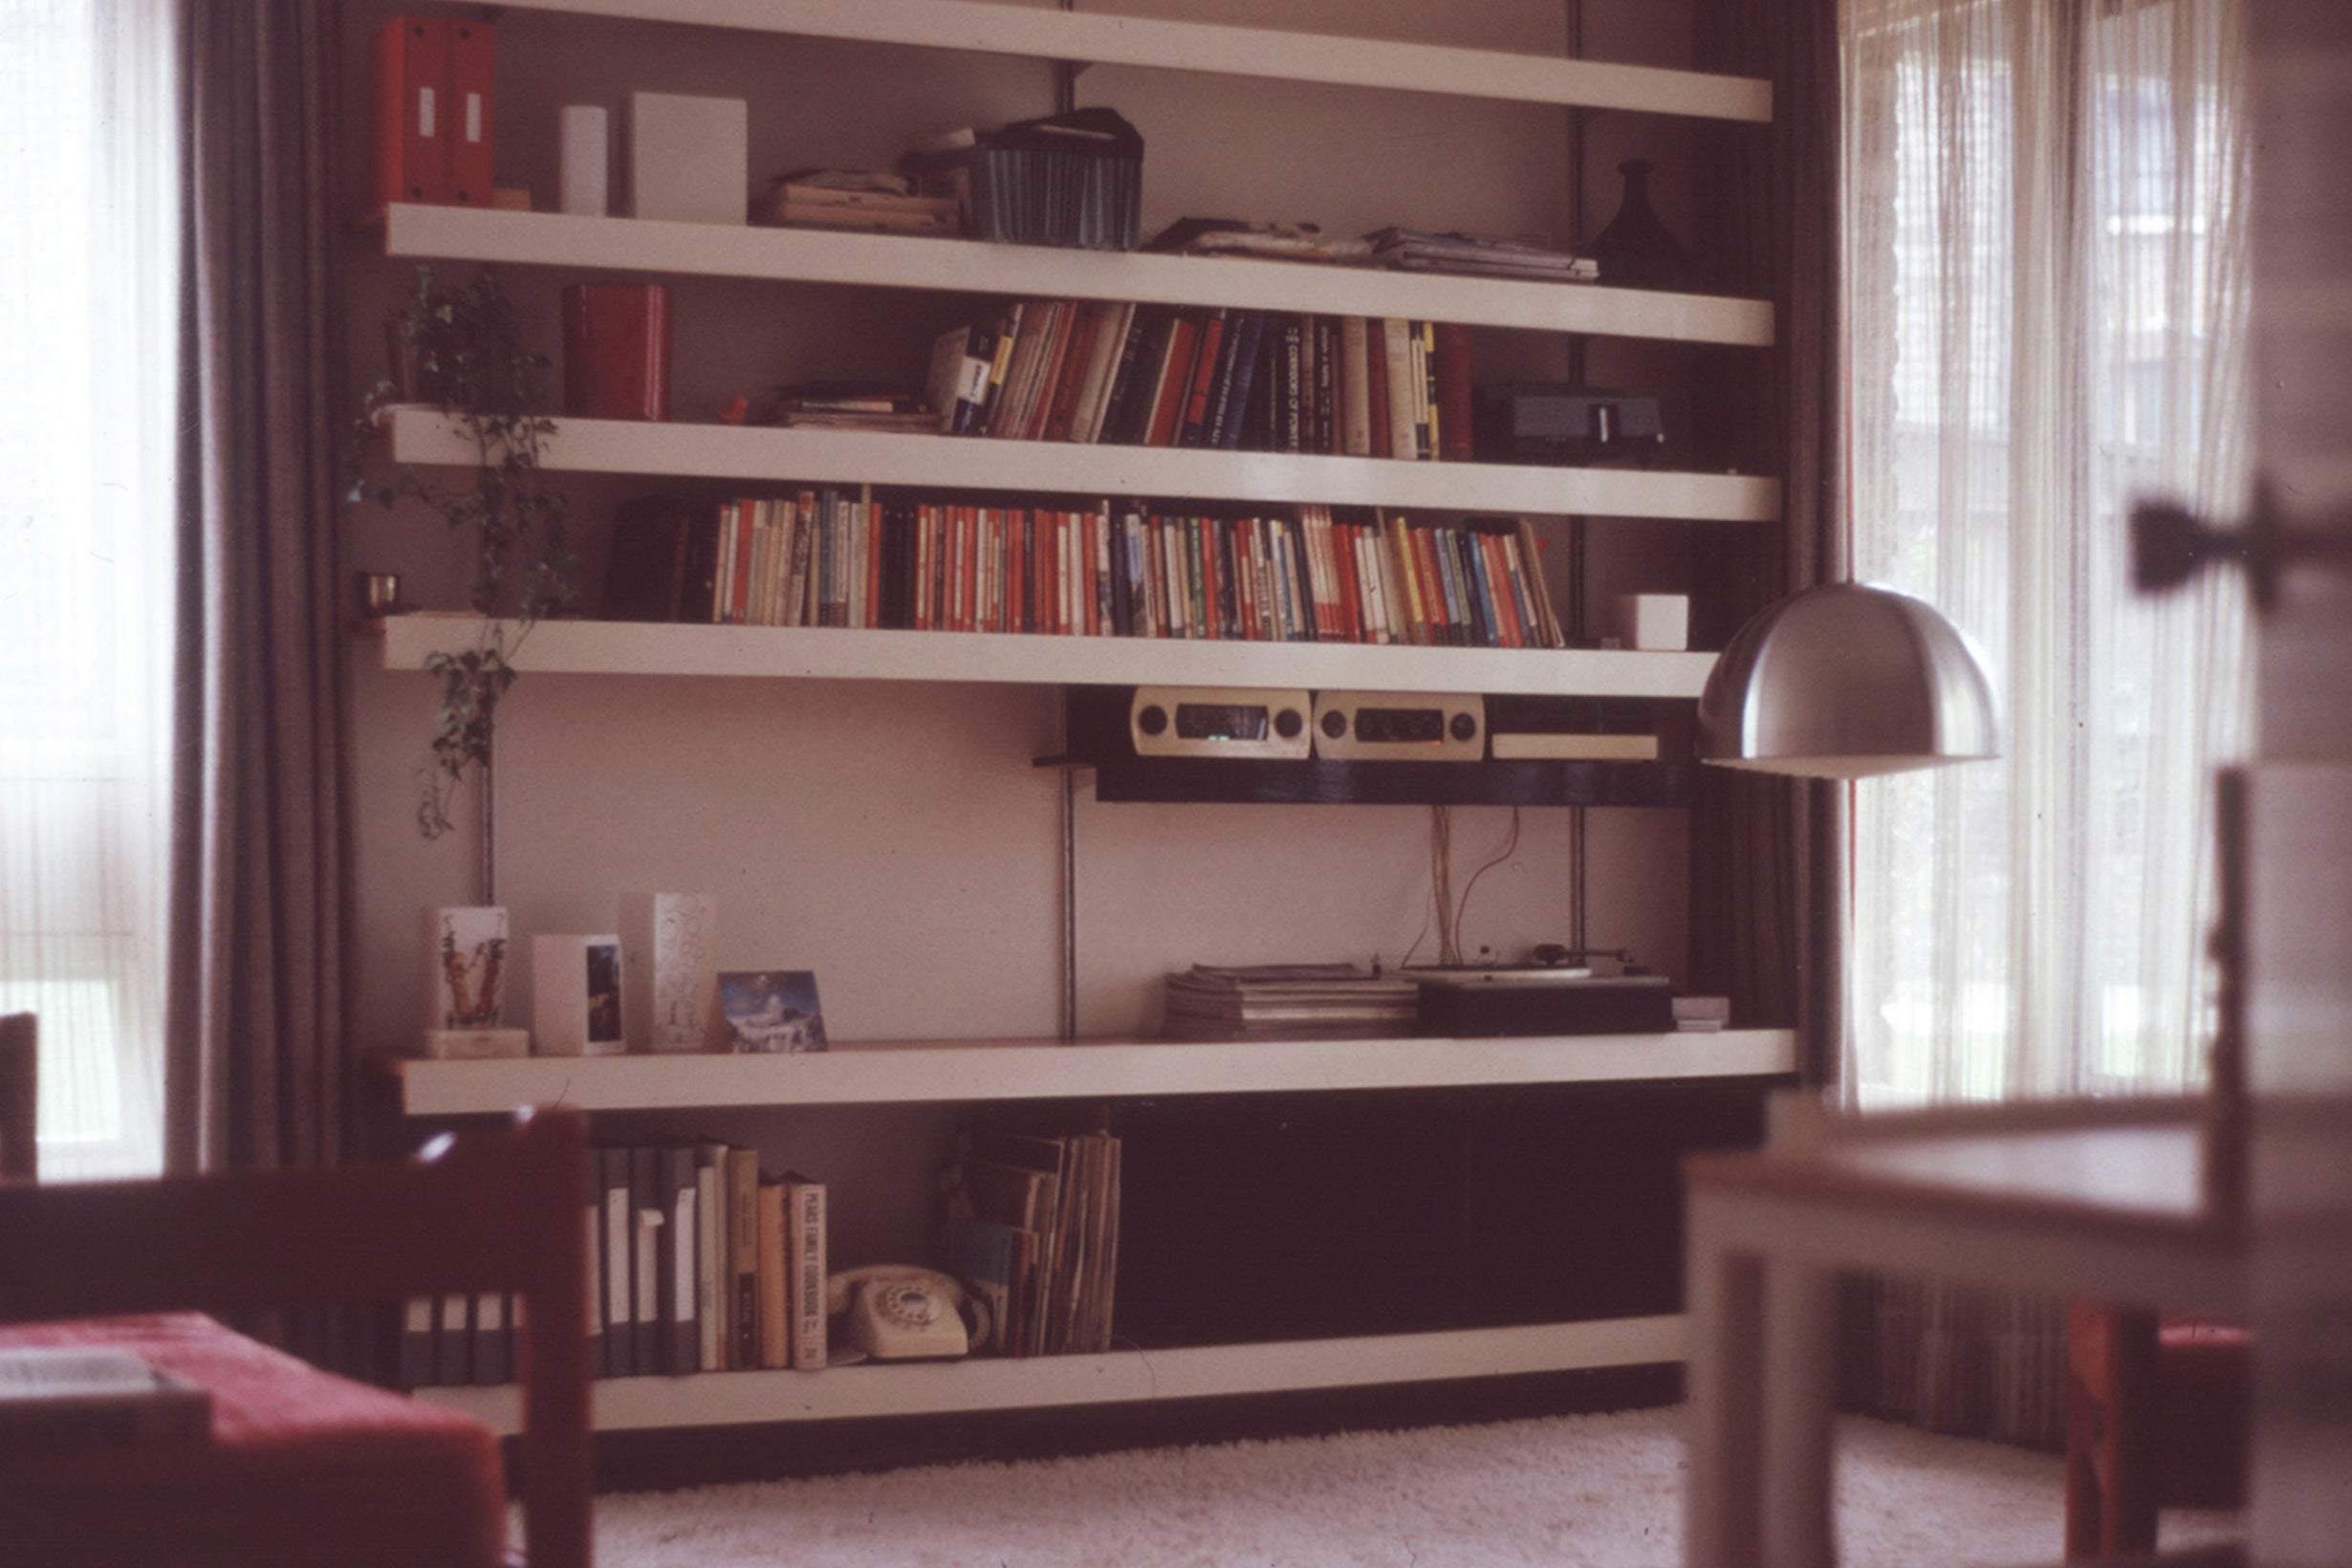 ON&ON shelving system in a 1960's living room with books, vinyl and record player